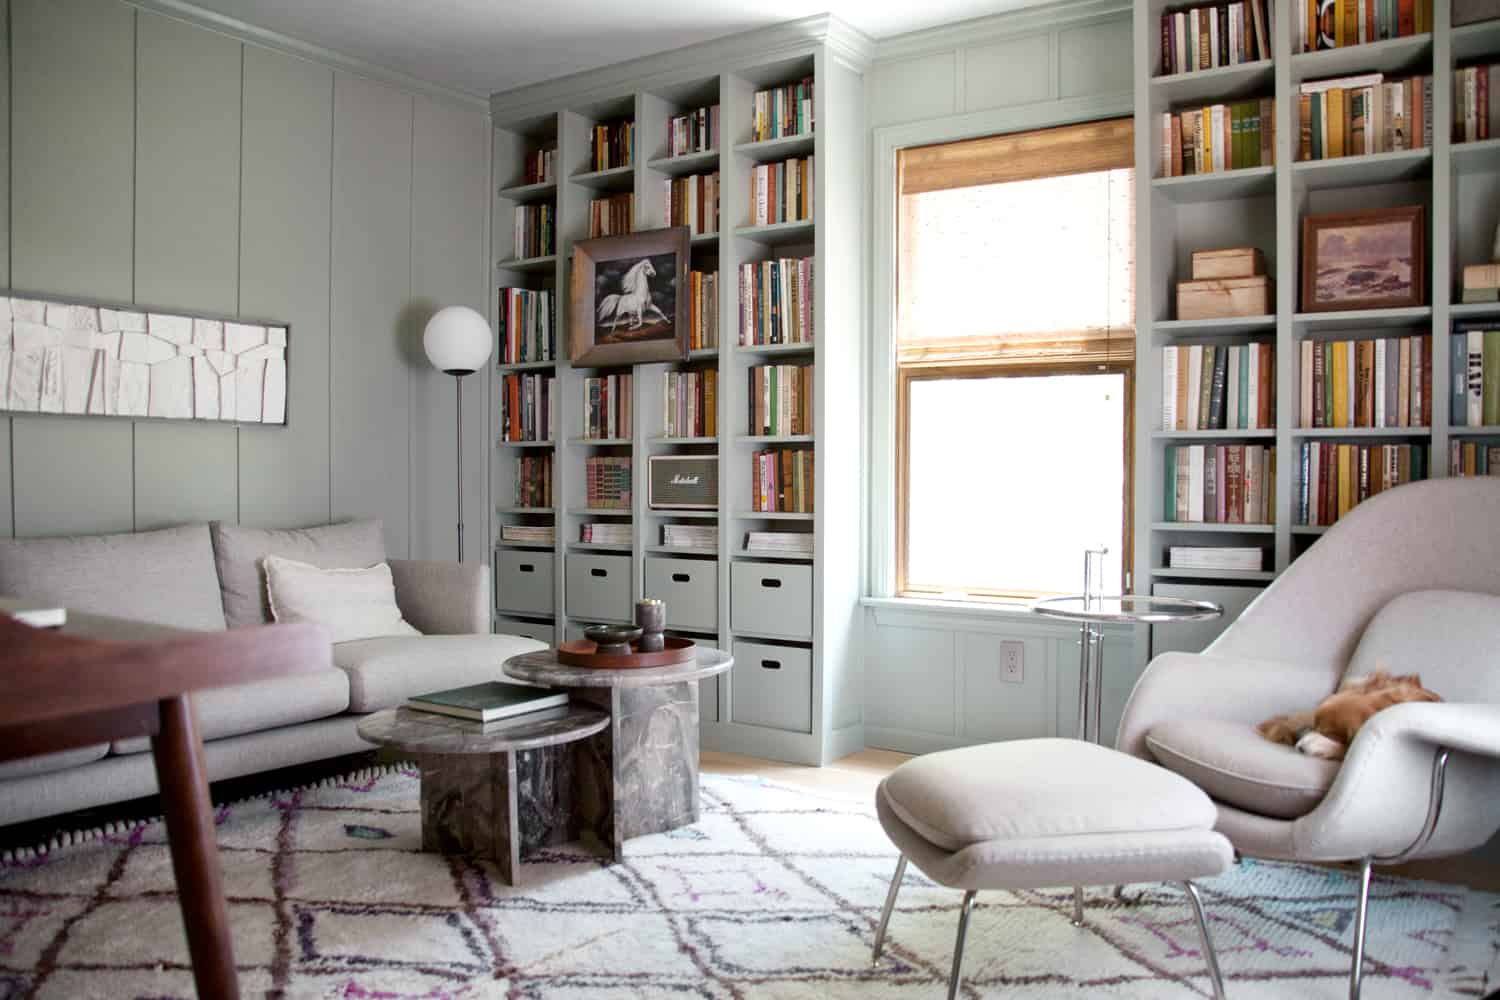 living room with built-in bookcases with a window in between, a gray couch, a gray chair, and a coffee table